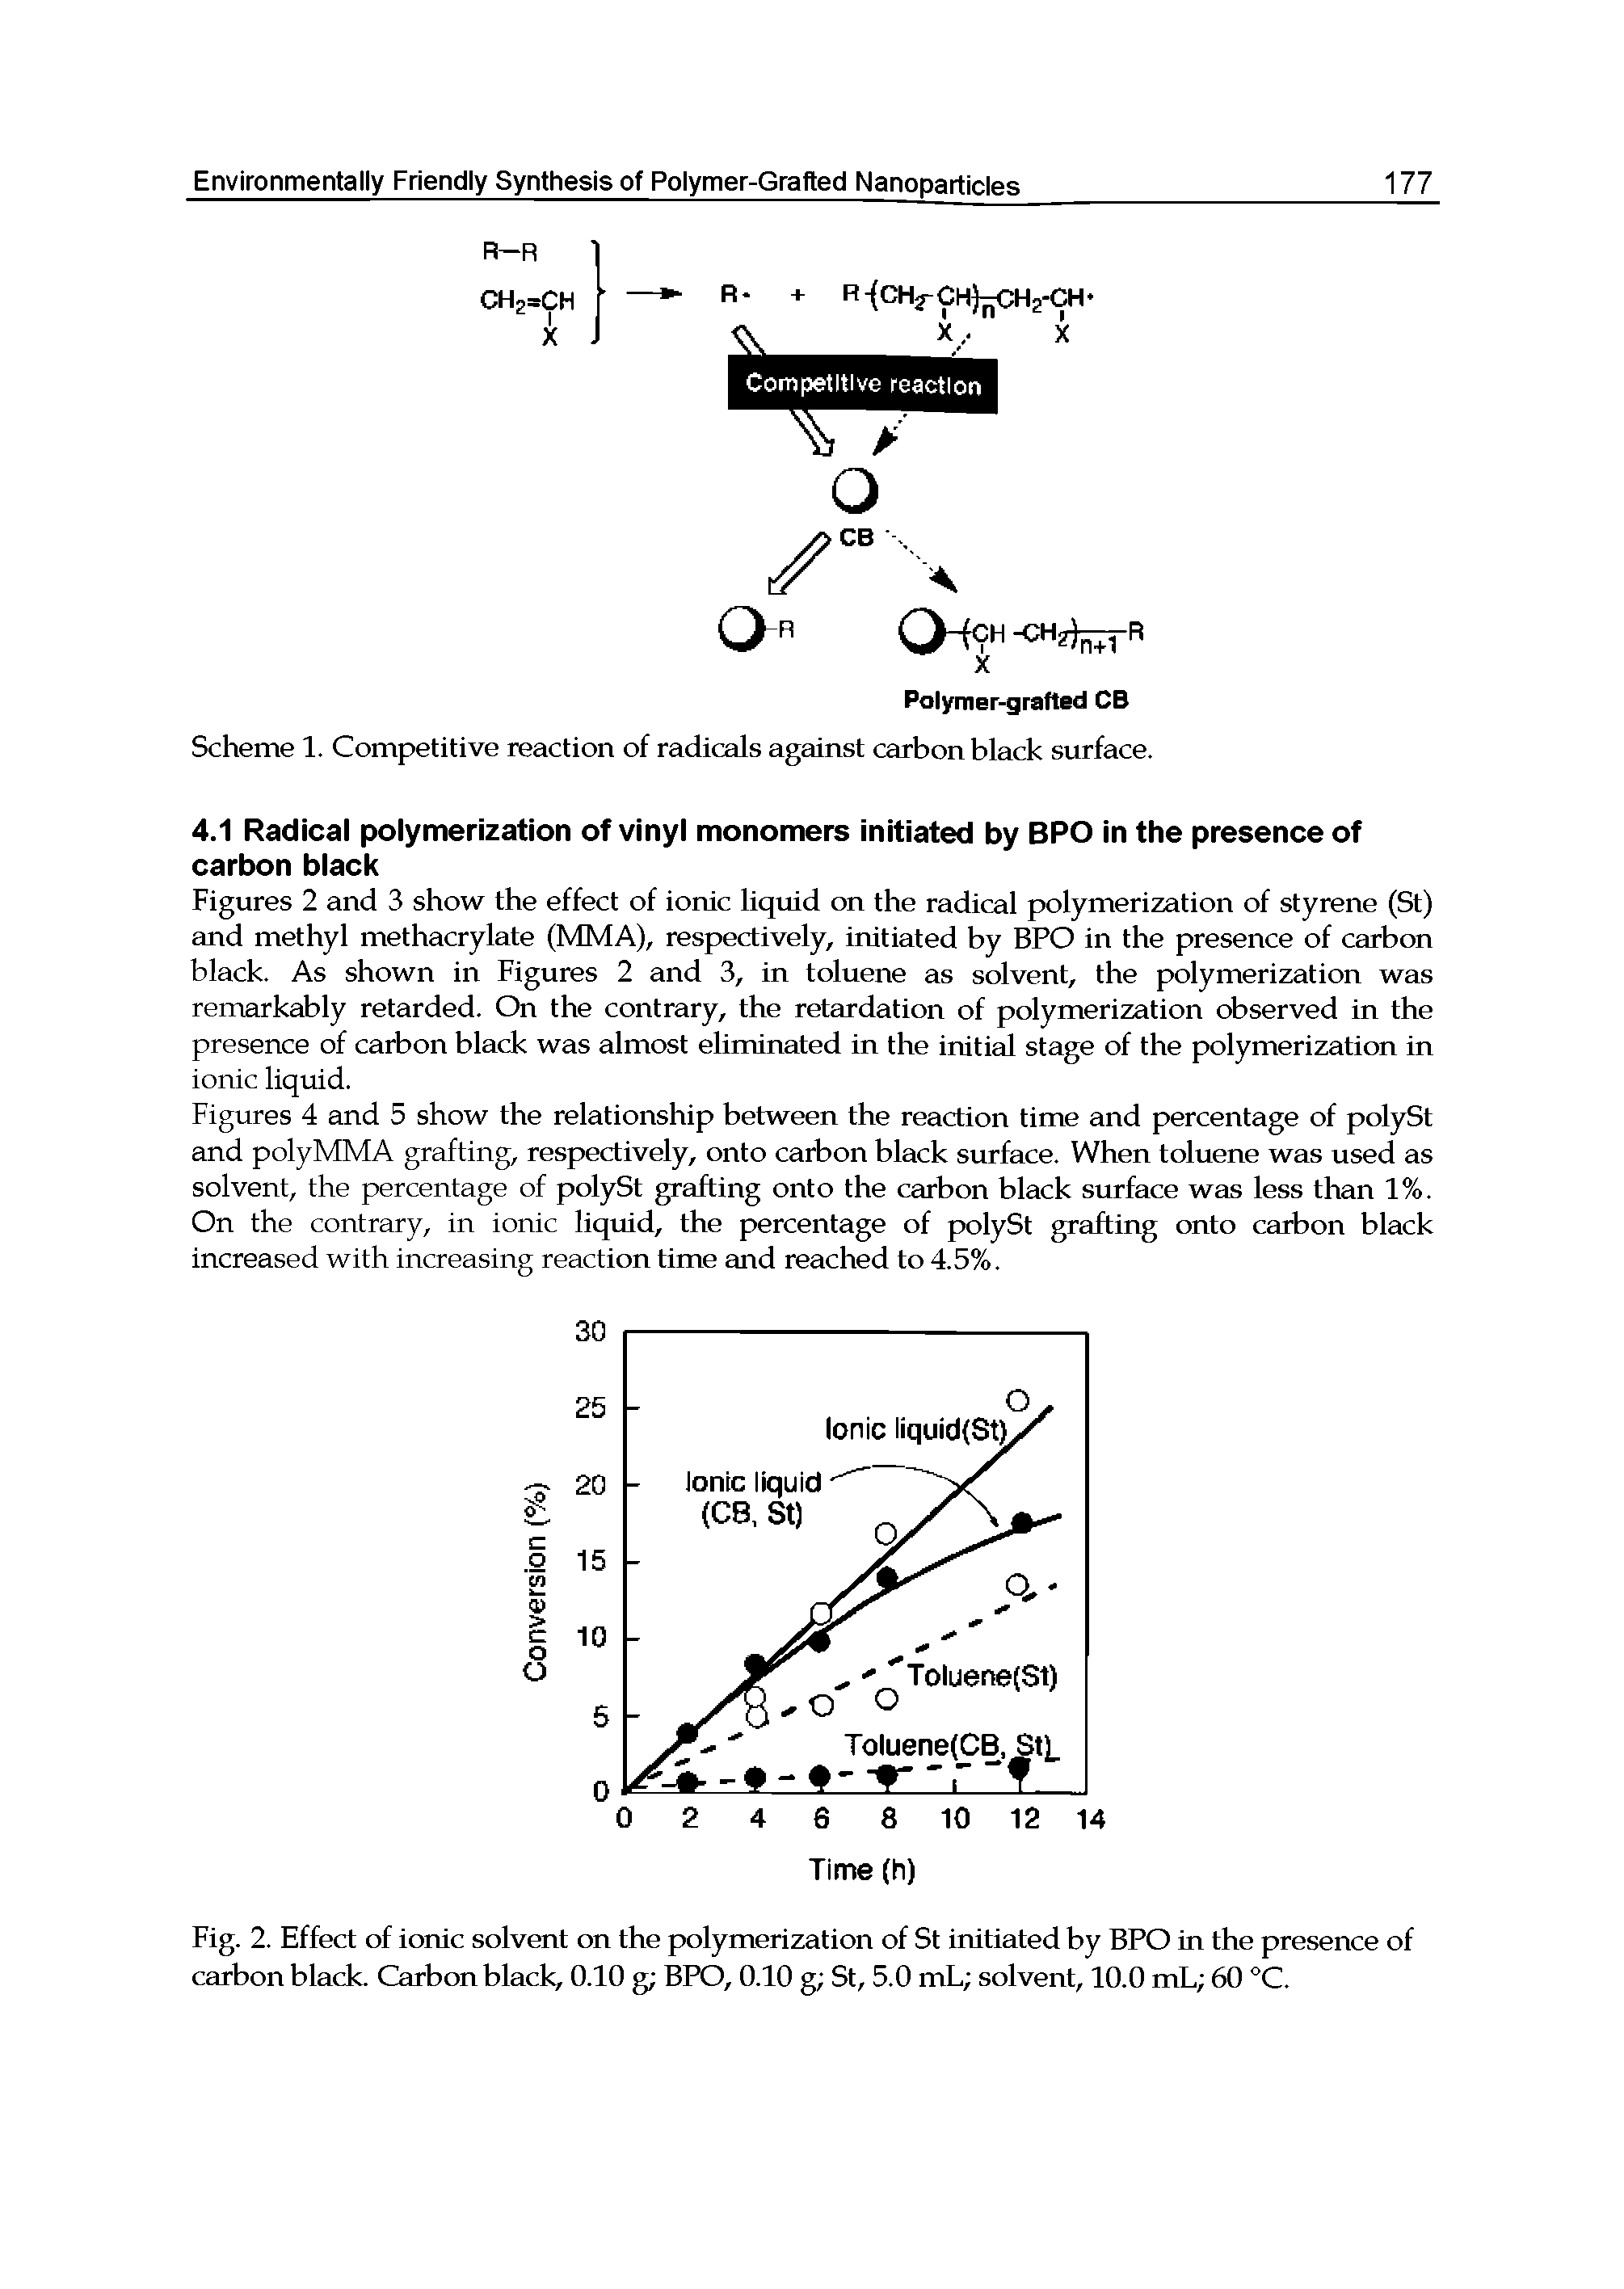 Figures 2 and 3 show the effect of ionic liquid on the radical polymerization of styrene (St) and methyl methacrylate (MMA), respectively, initiated by BPO in the presence of carbon black. As shown in Figures 2 and 3, in toluene as solvent, the polymerization was remarkably retarded. On the contrary, the retardation of polymerization observed in the presence of carbon black was almost eliminated in the initi stage of the polymerization in ionic liquid.